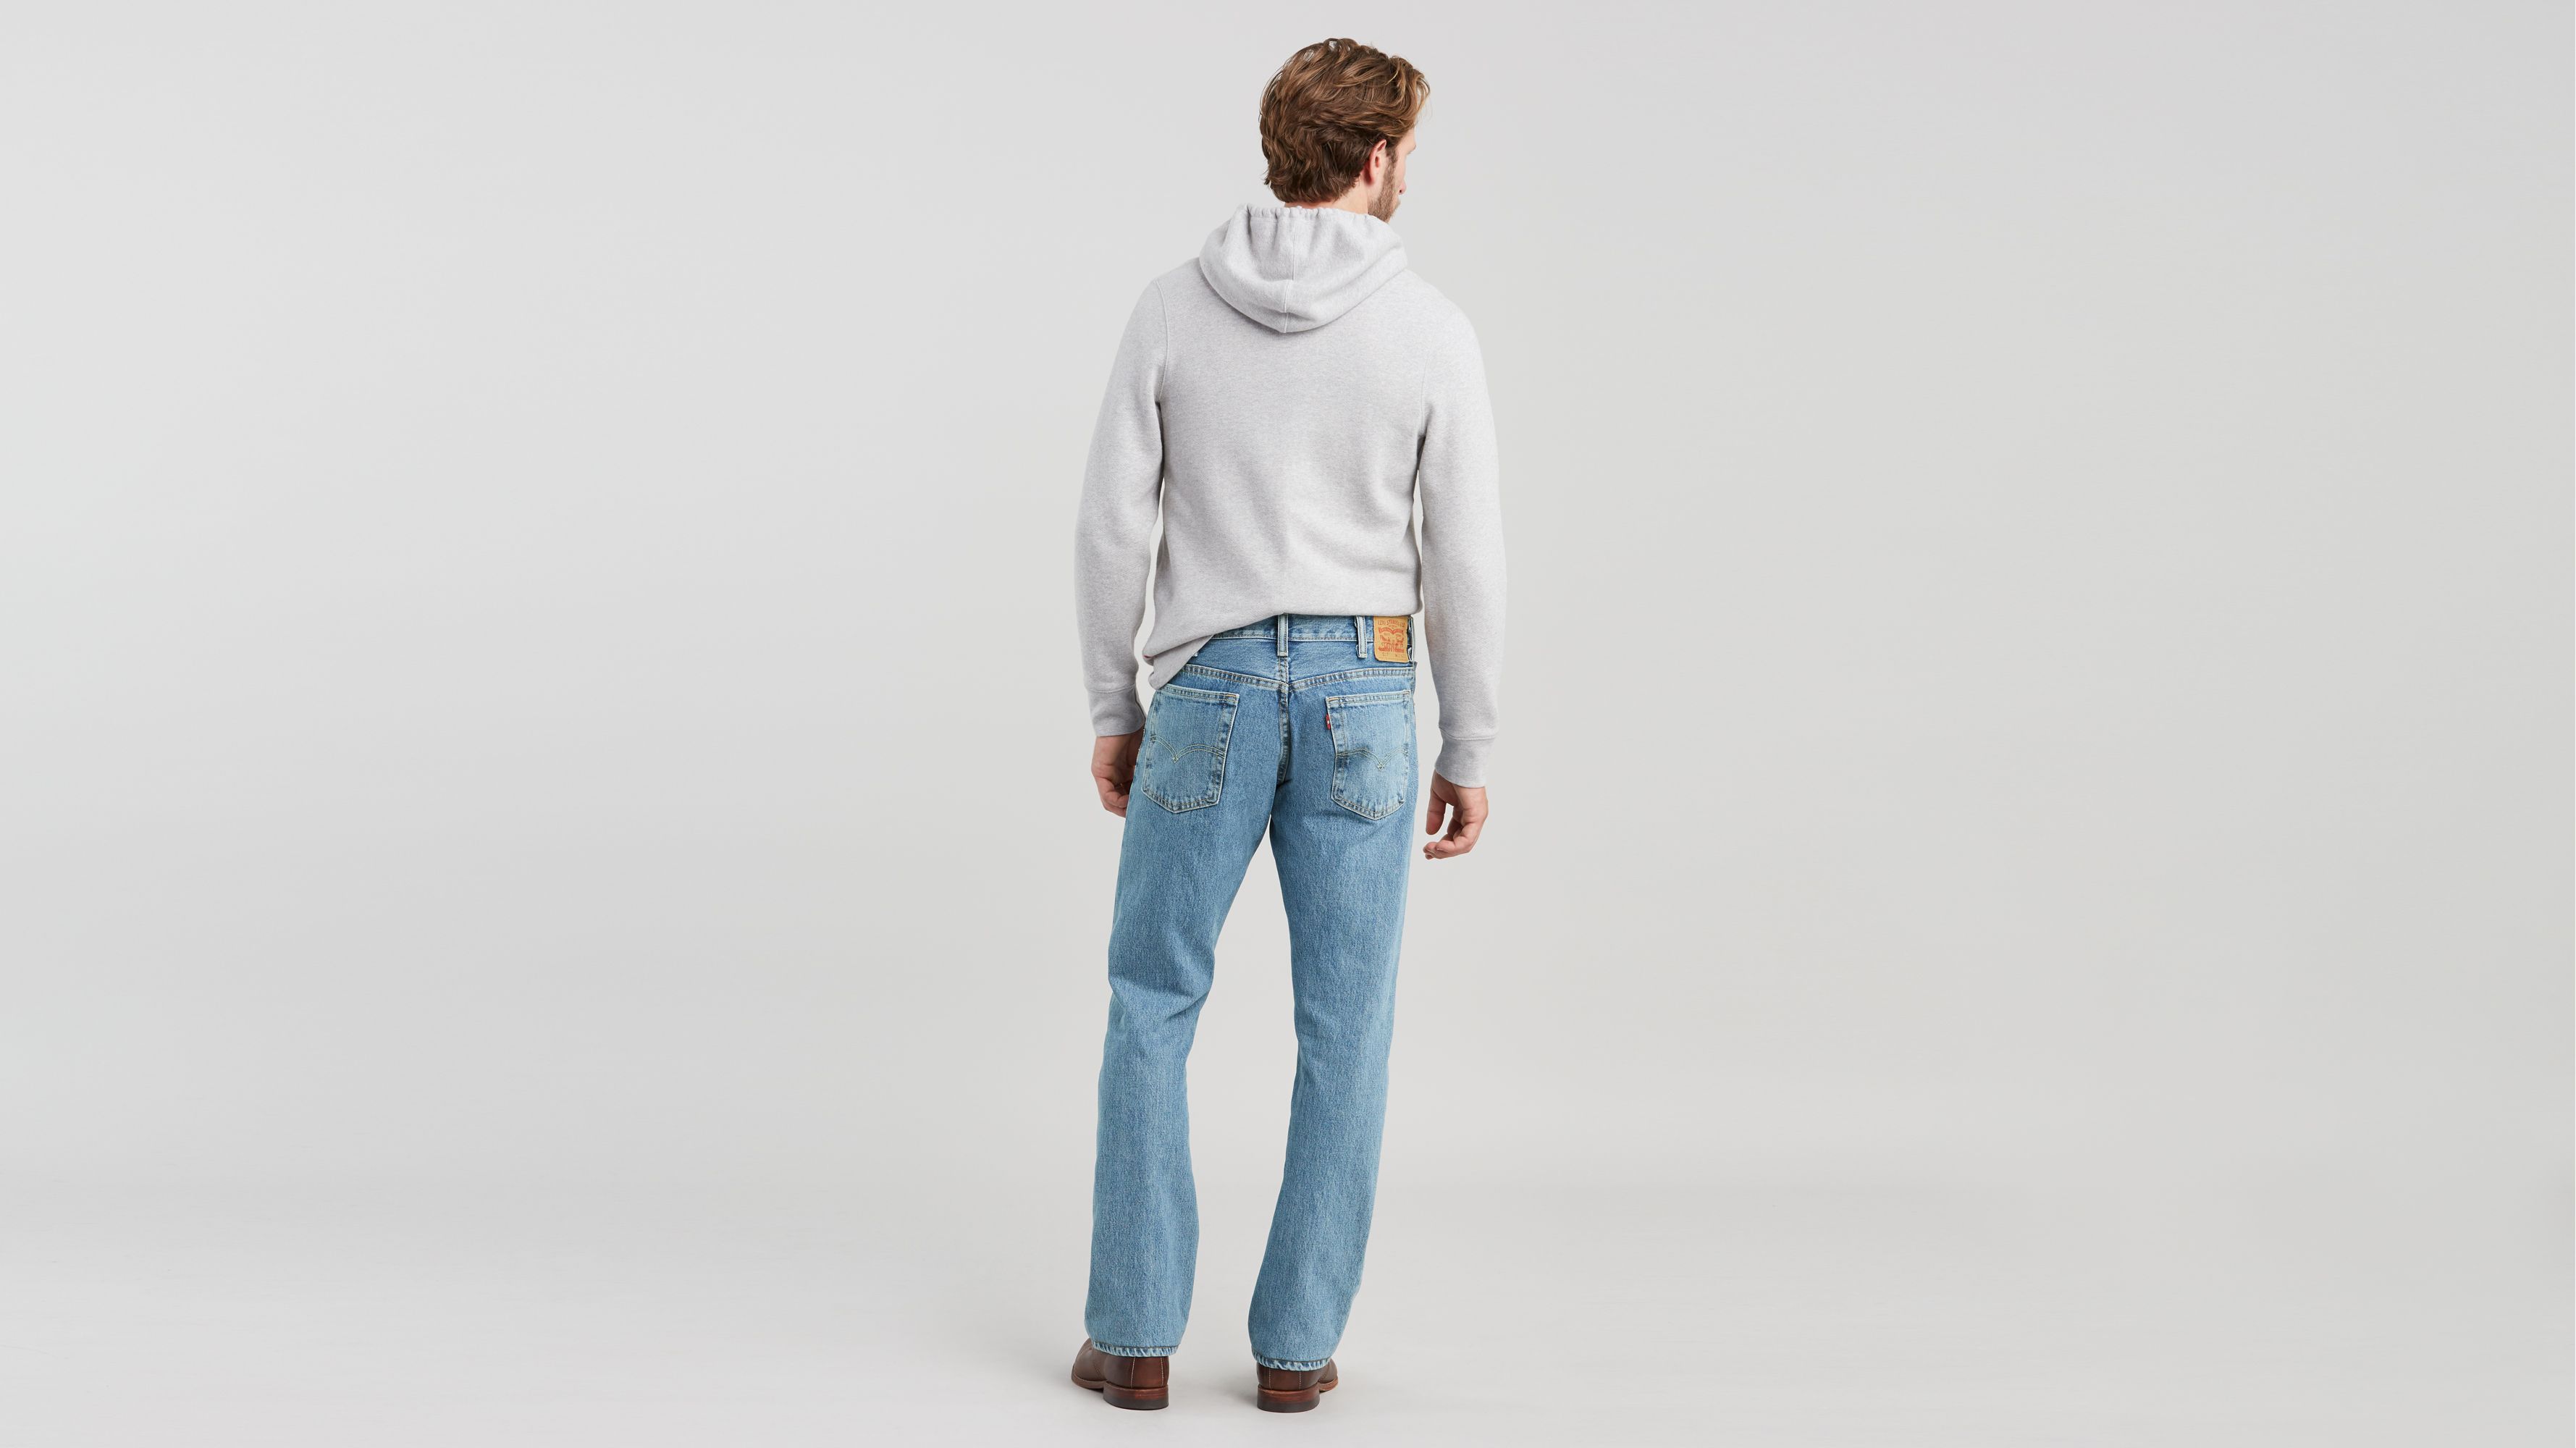 Monogram Patch Boot-Cut Jeans - Men - OBSOLETES DO NOT TOUCH